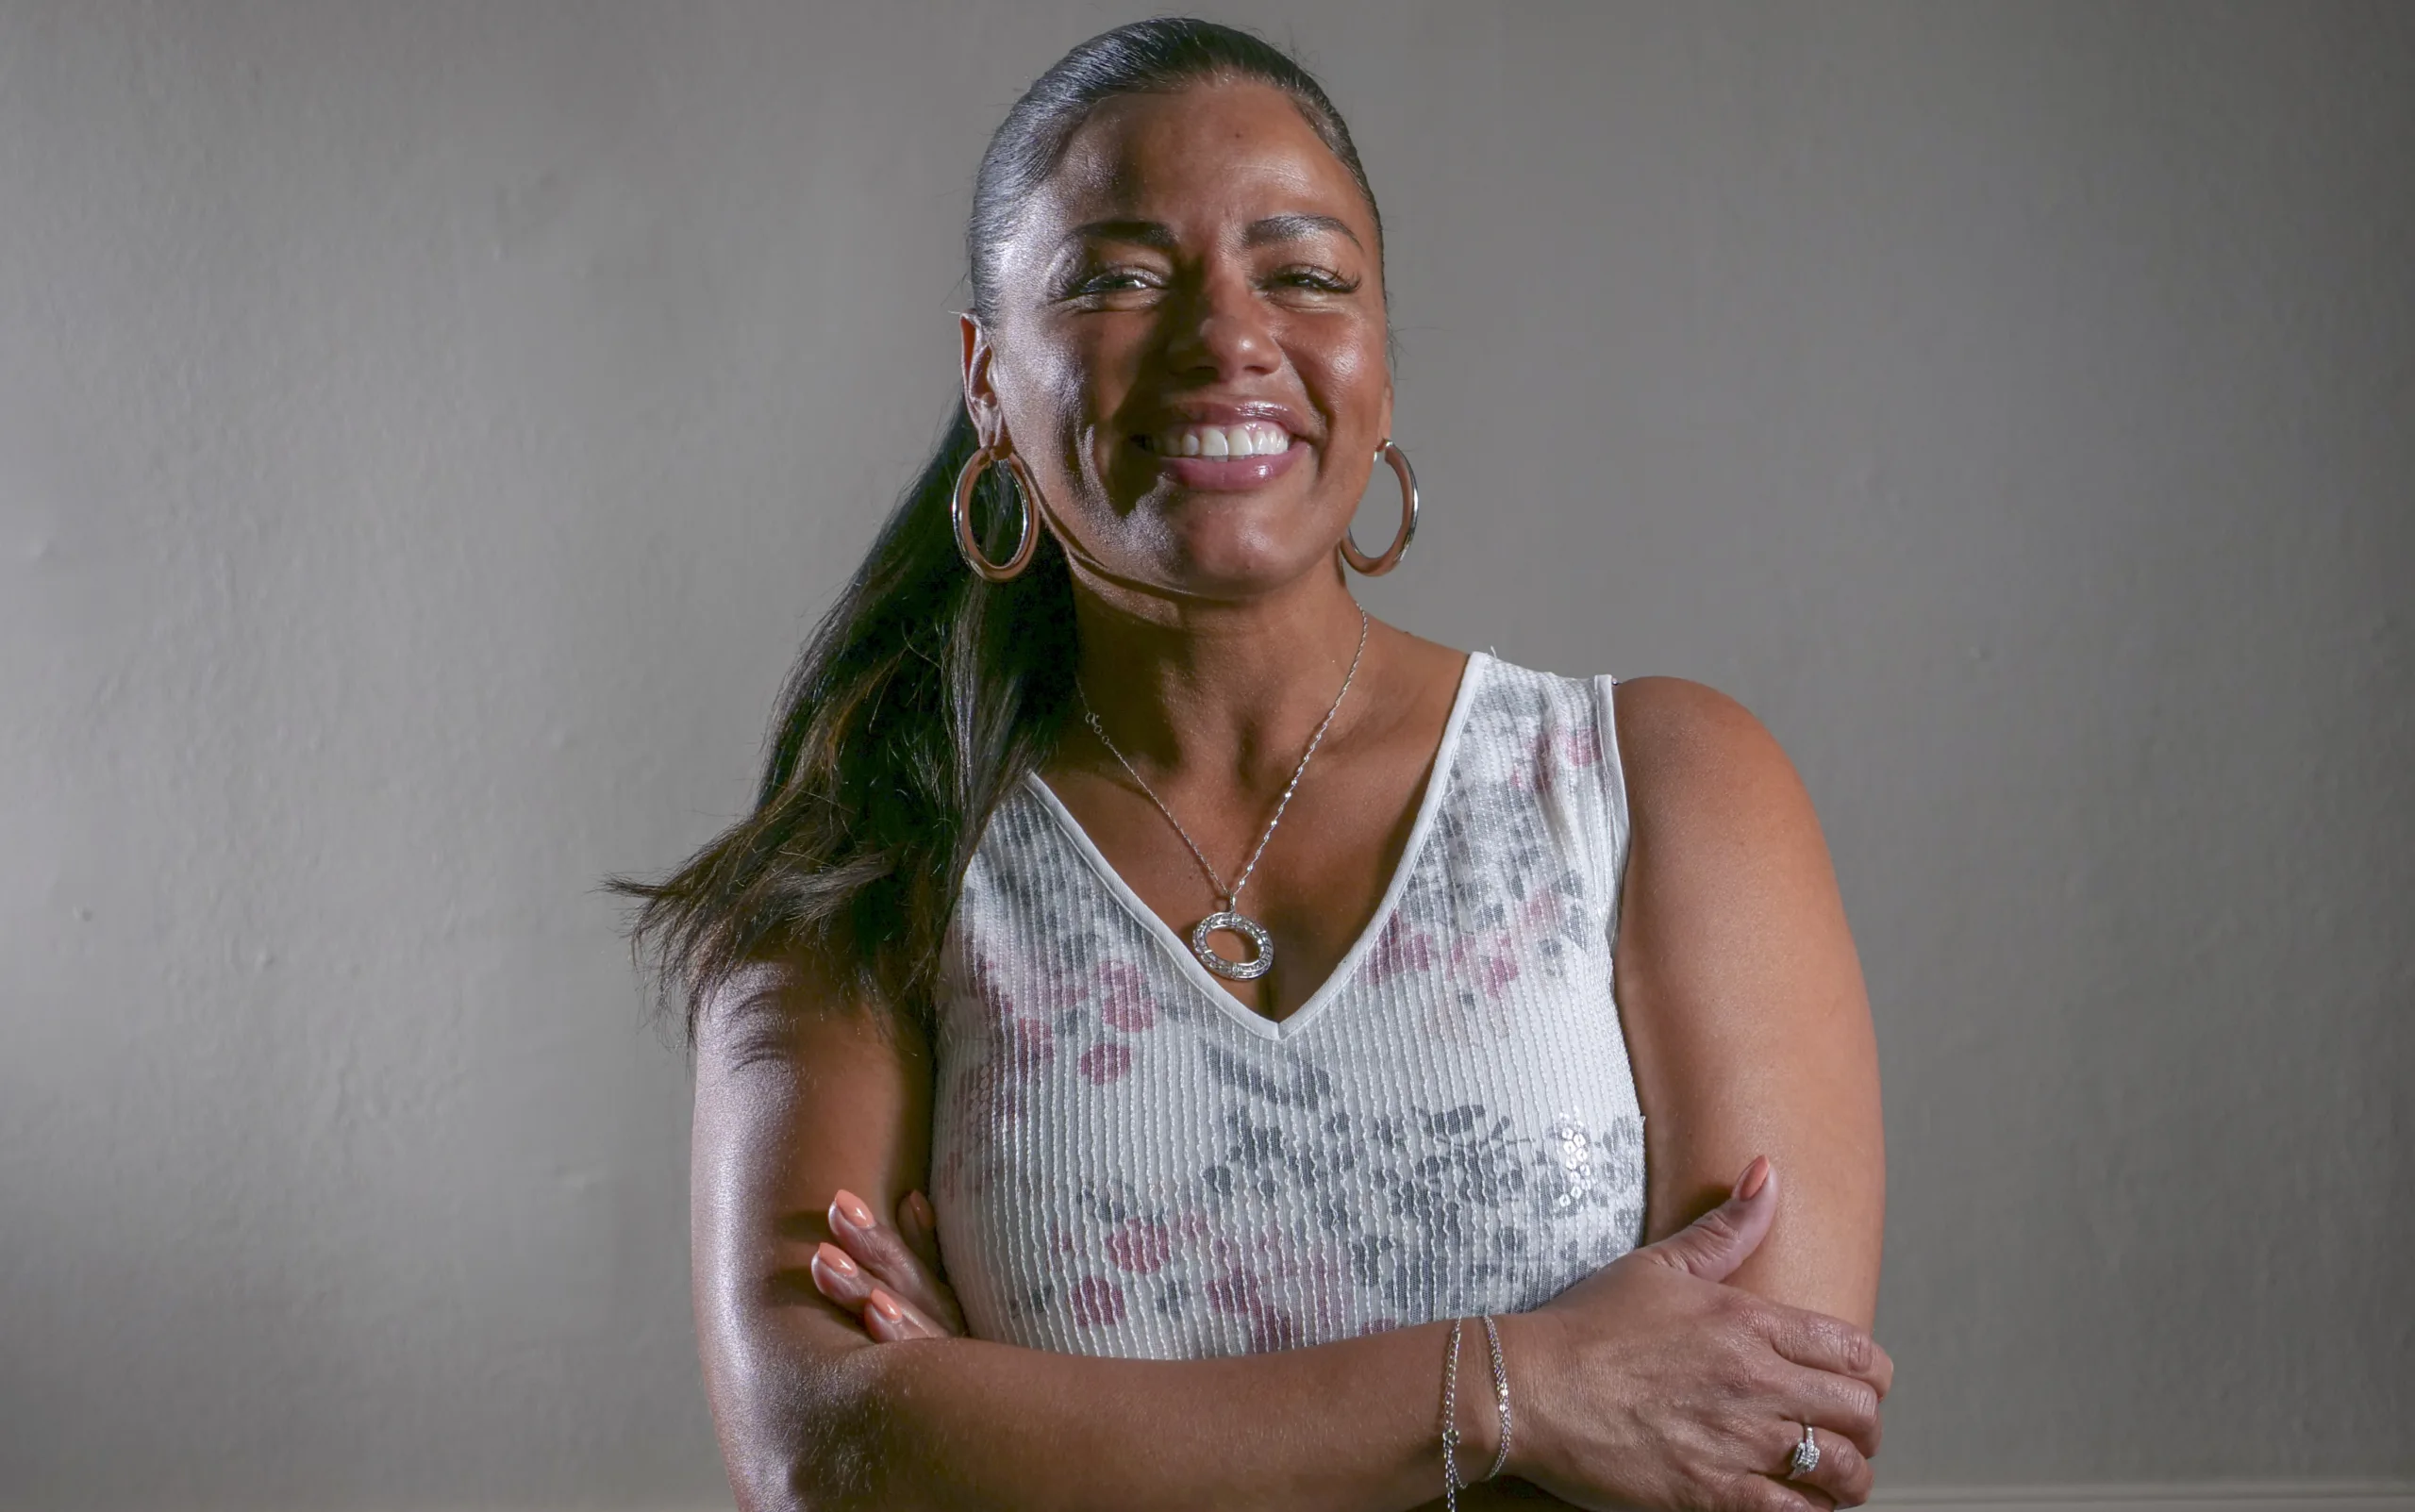 Tyra Patterson (Image: Lacy Atkins/Innocence Project)